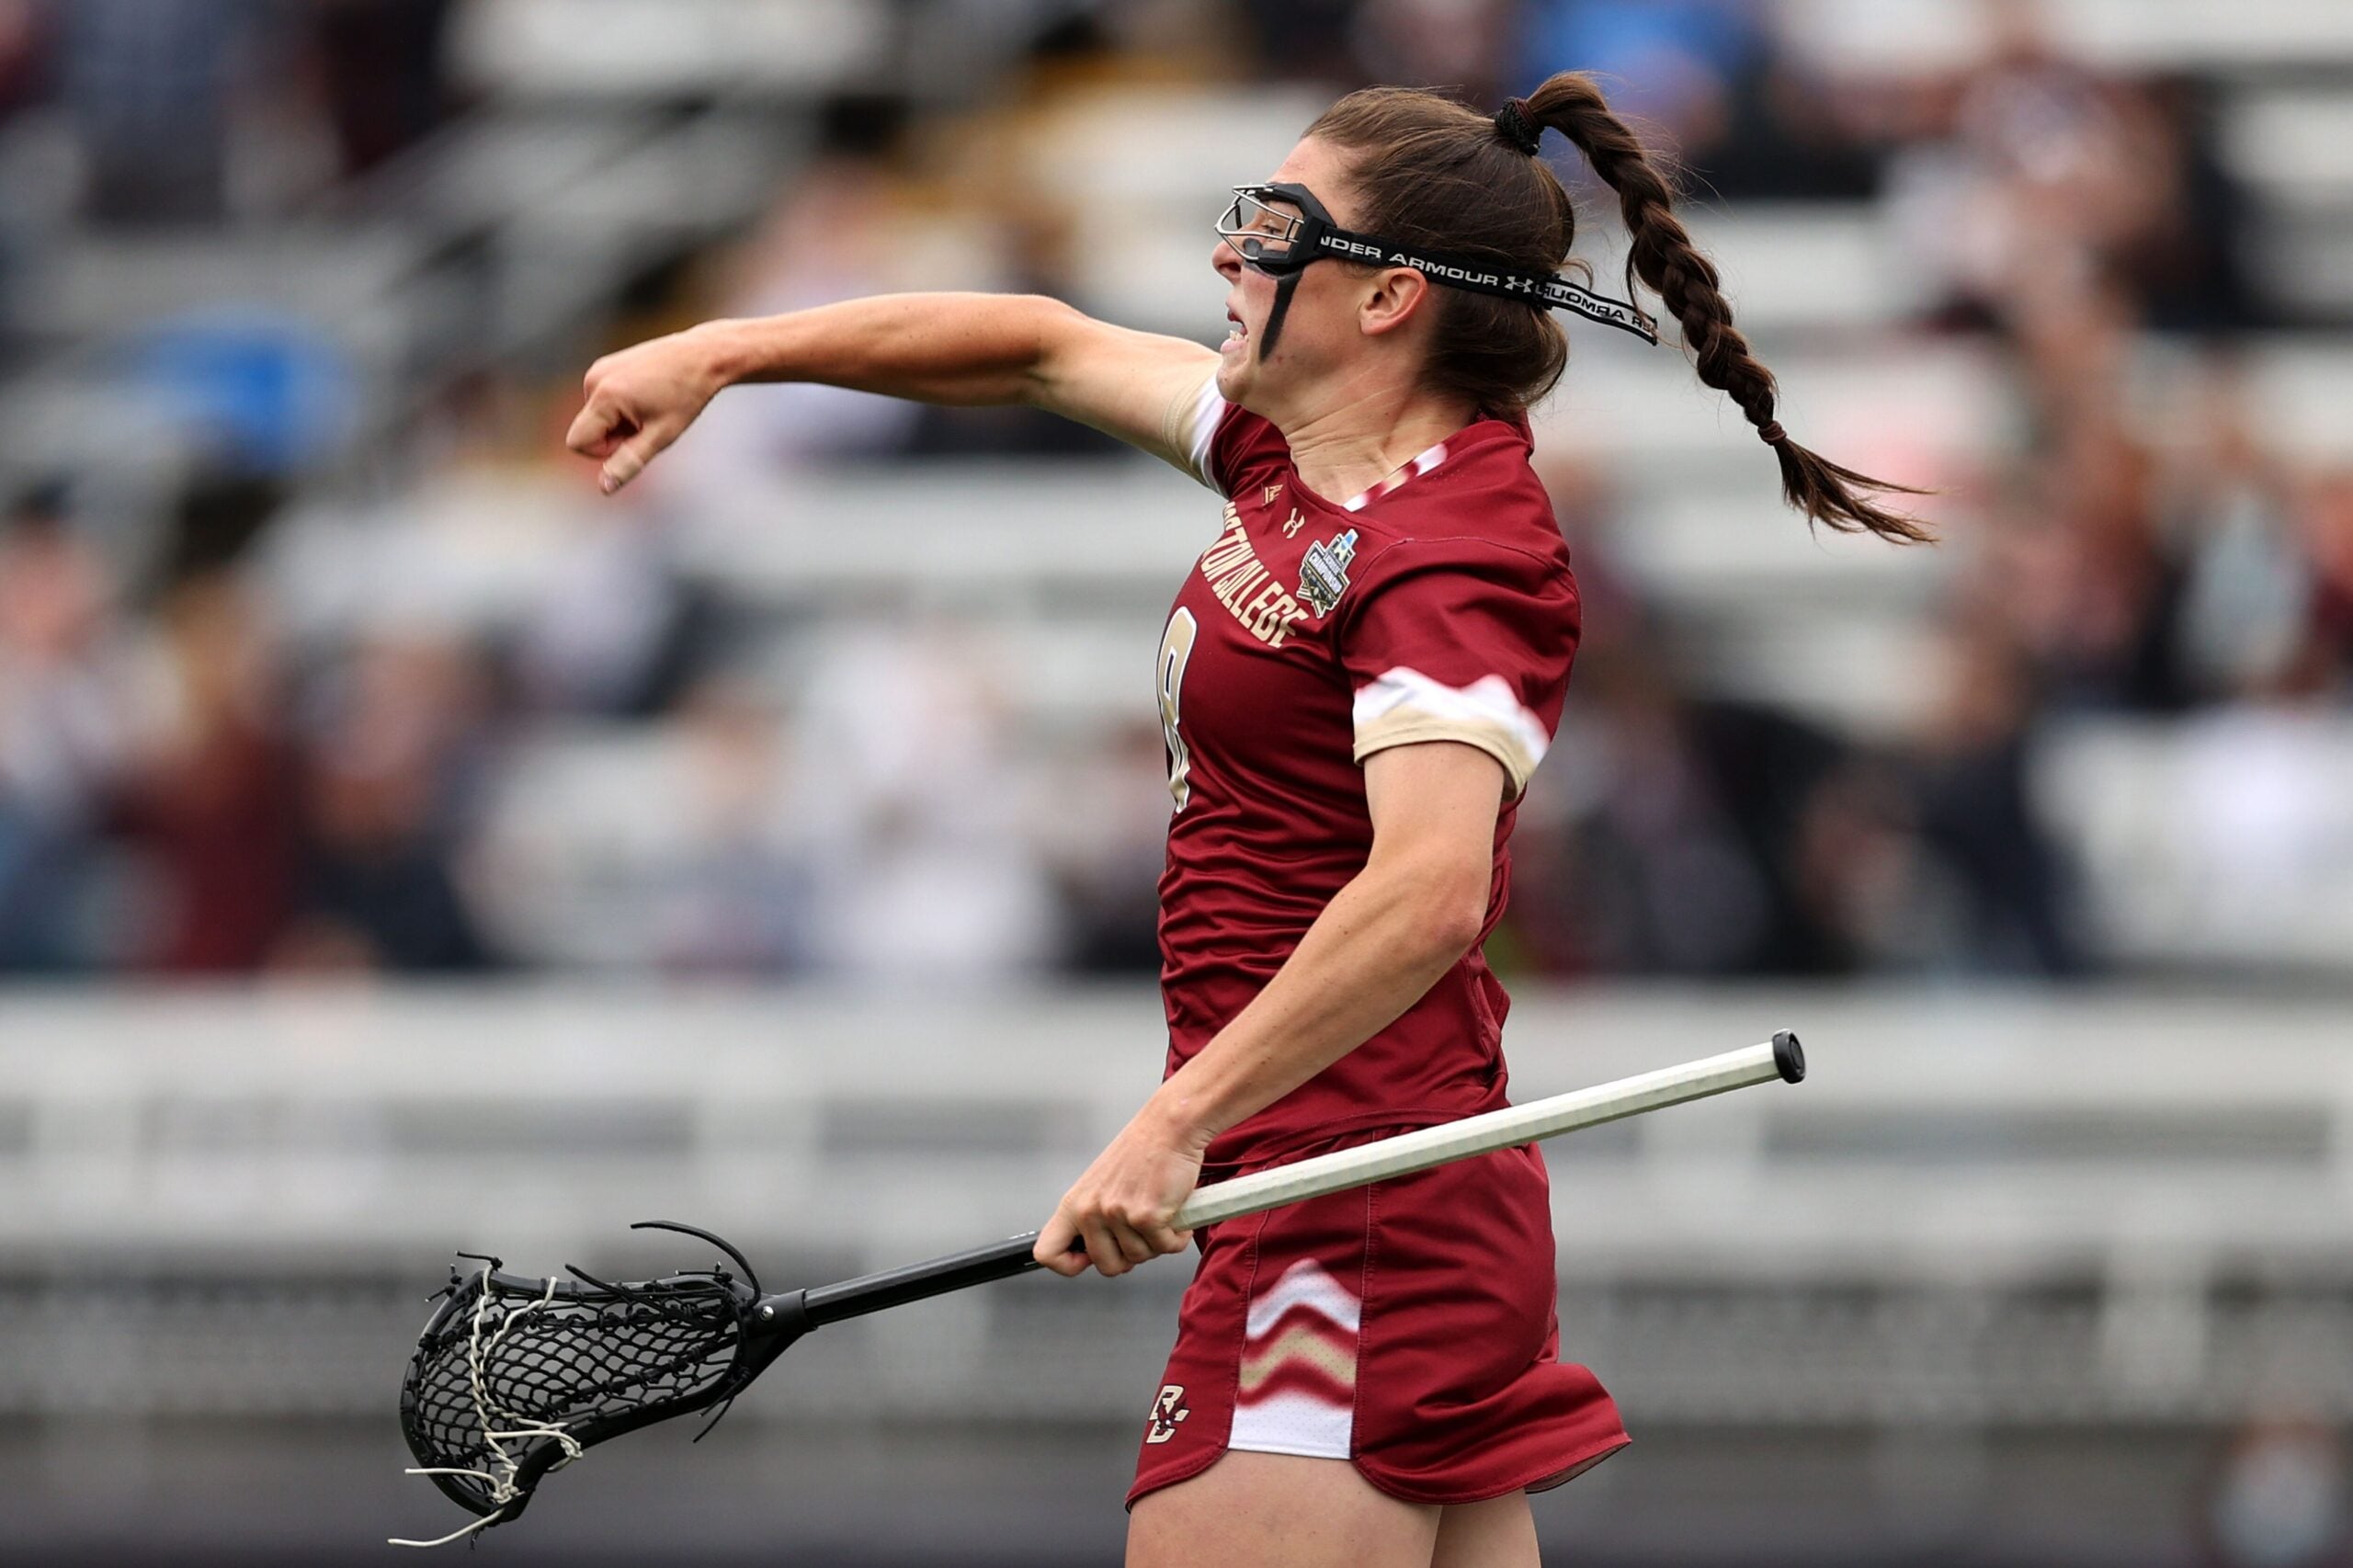 Boston College women’s lacrosse team defeats Syracuse to win first